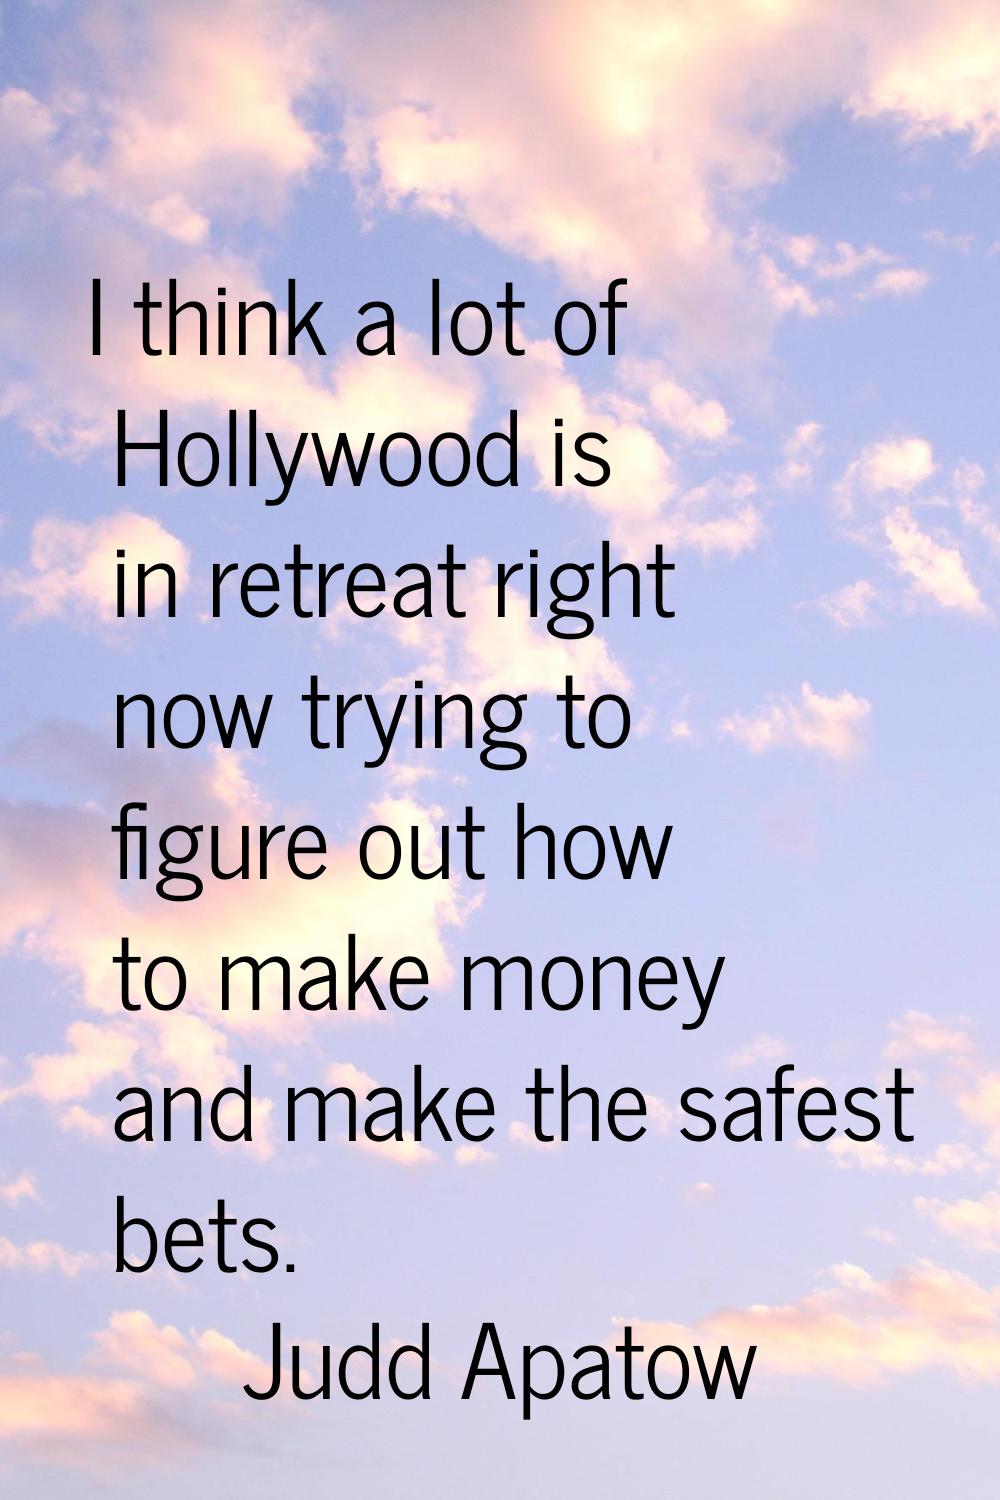 I think a lot of Hollywood is in retreat right now trying to figure out how to make money and make 